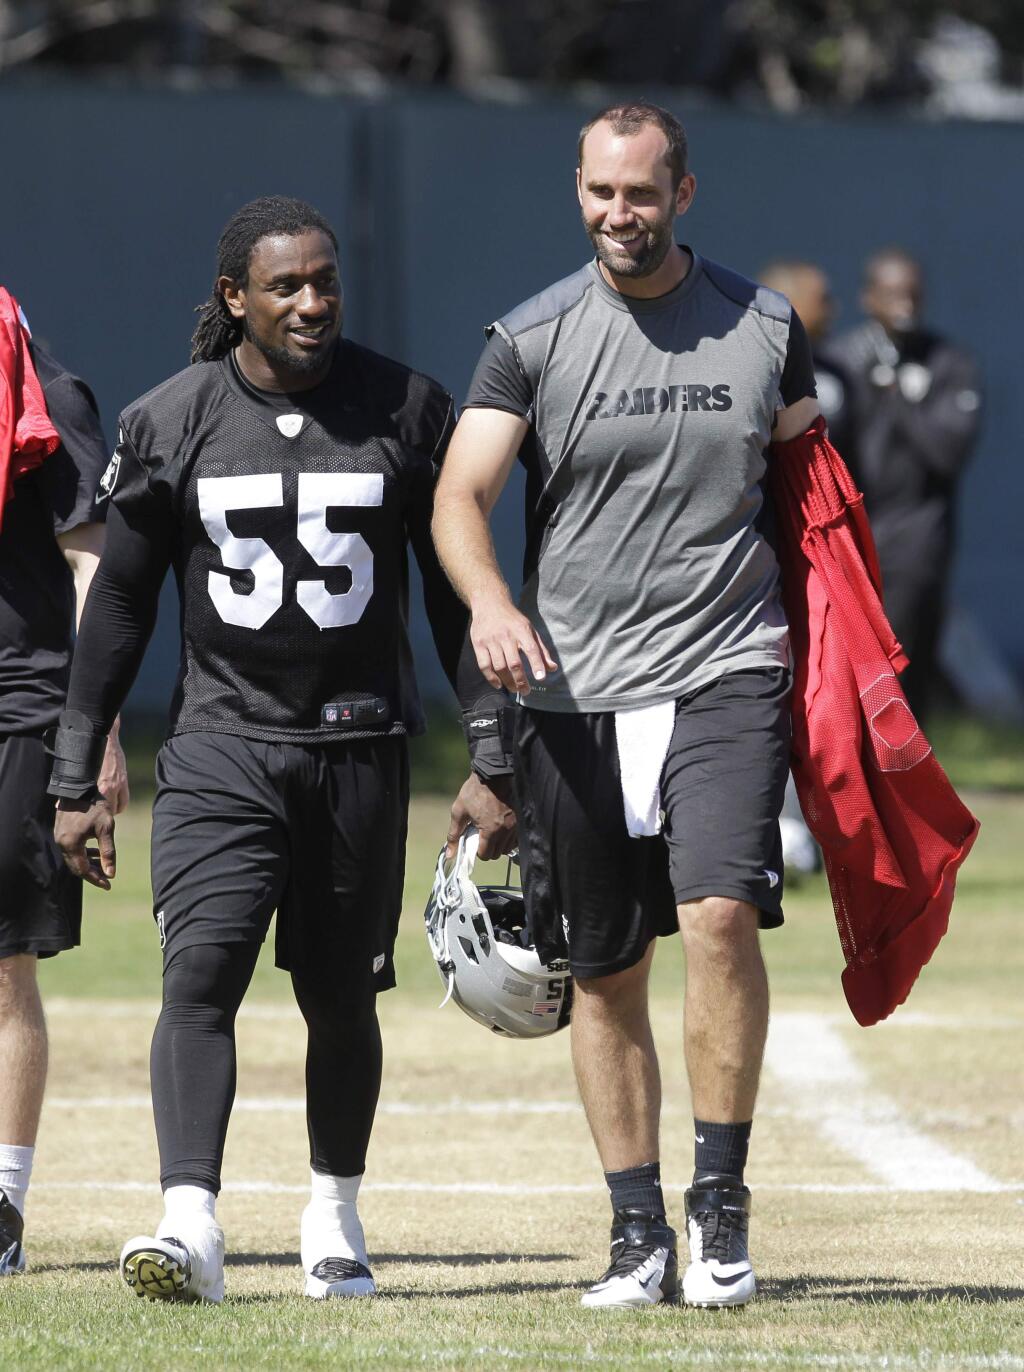 Oakland Raiders quarterback Matt Schaub, right, walks off the field with linebacker Sio Moore after practice at the Raiders mini camp in Alameda, Calif., Wednesday, June 18, 2014.(AP Photo/Rich Pedroncelli)